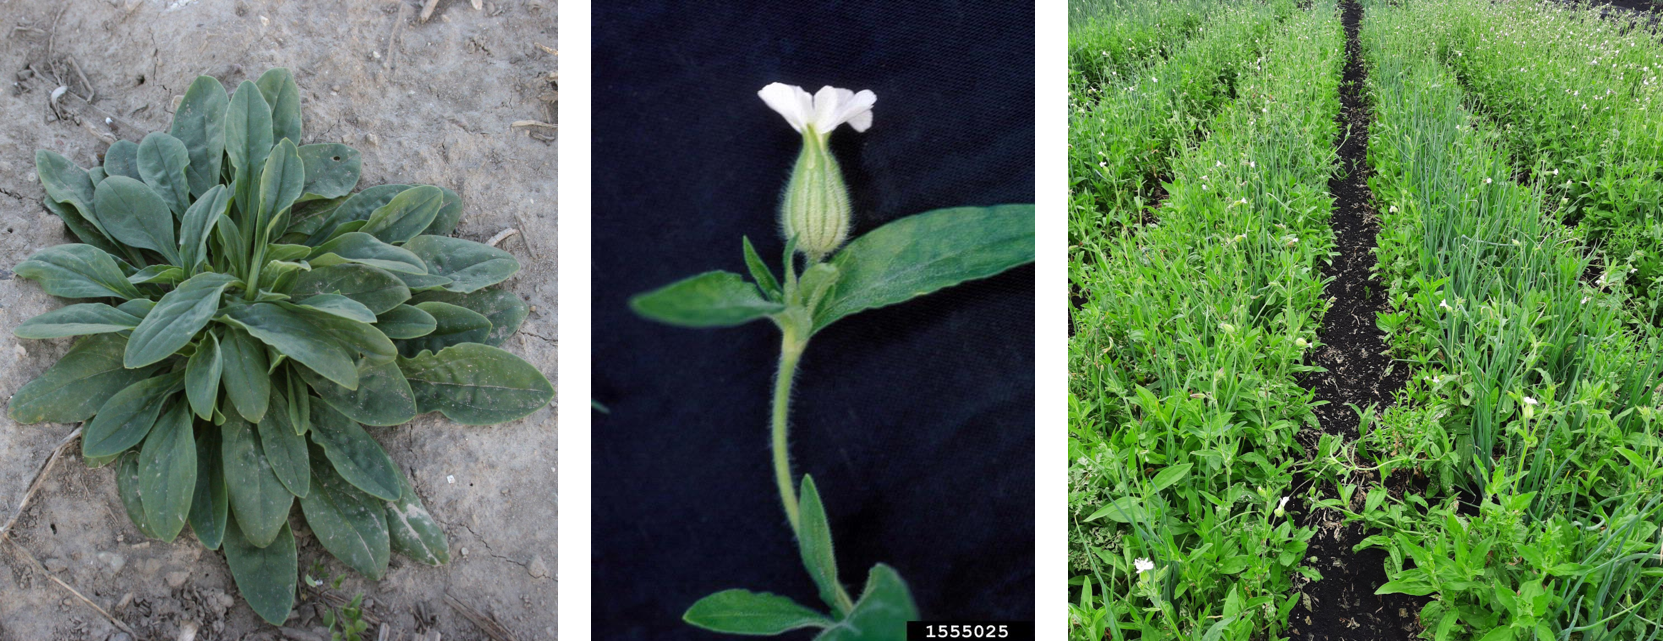 Three pictures of white campion showing the rosette, flower, and an infestation in an onion field.